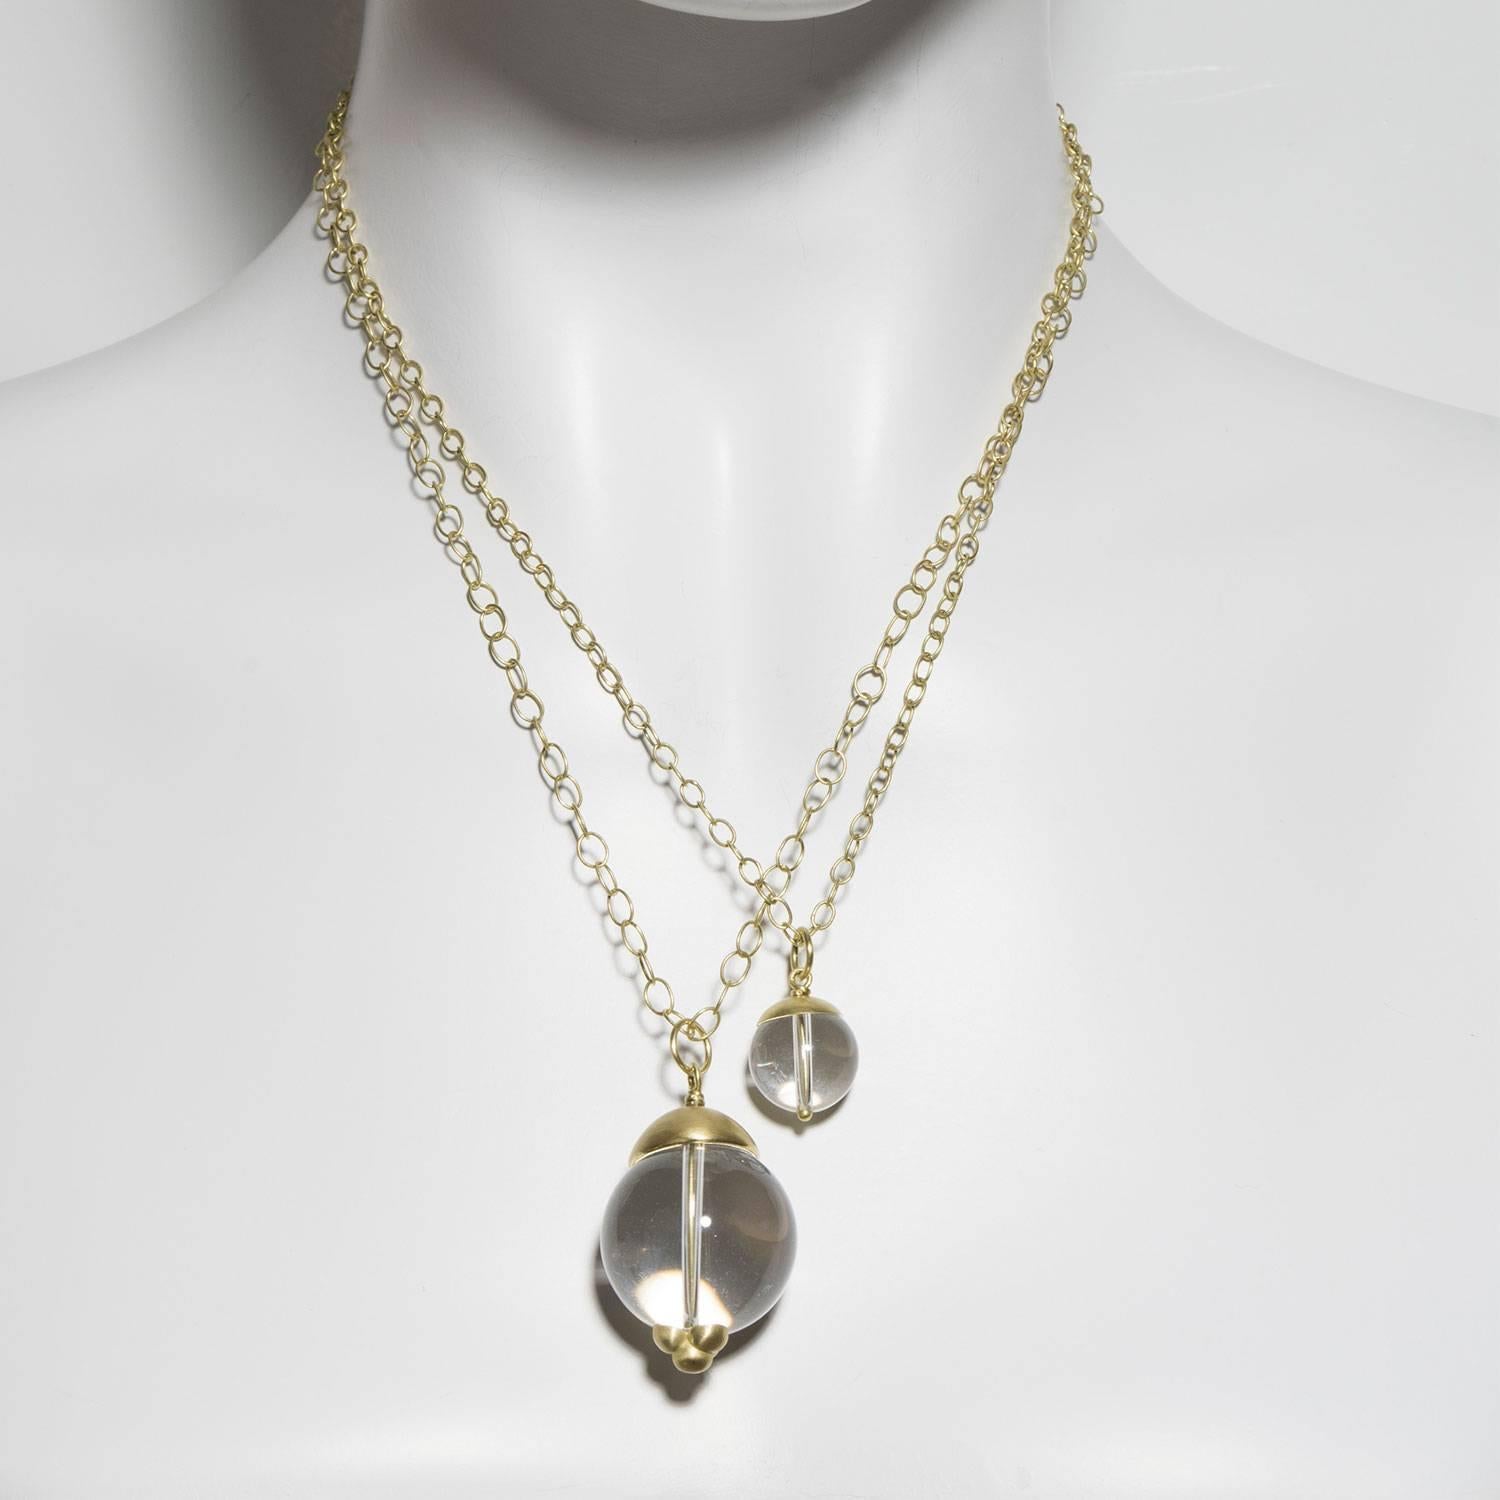 Faye Kim 18 Karat Gold Rock Crystal Quartz Orb Pendant on Chain In New Condition For Sale In Westport, CT